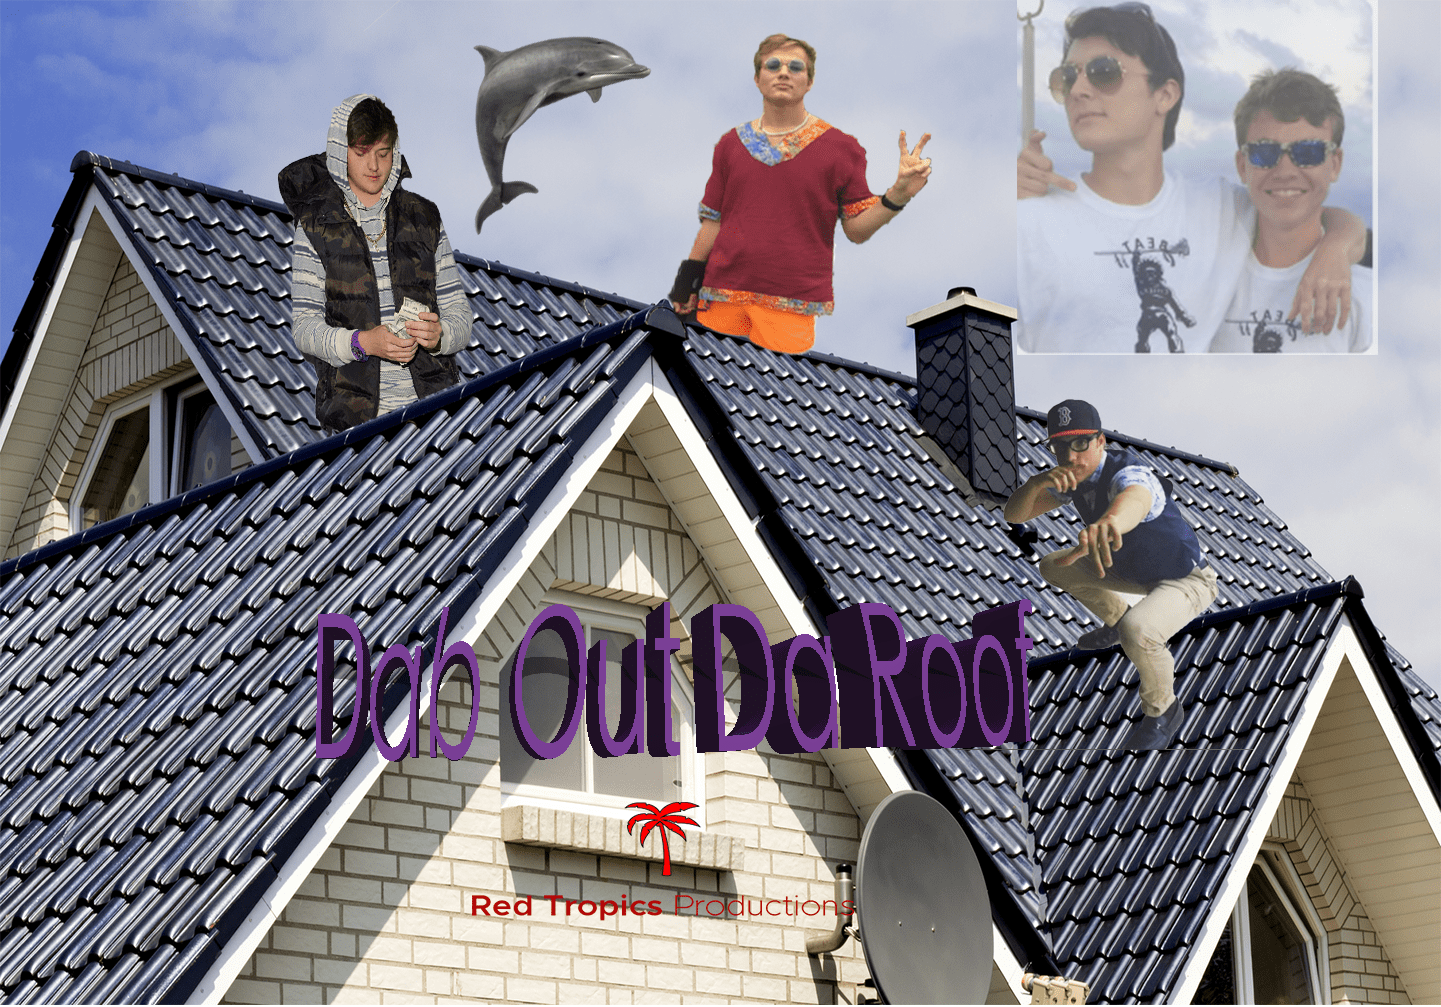 New Single By Lil Higgy The Dolphin God - "Dab Out Da Roof" Ft. Lucky P, ADHD Boi & Pussy Boi